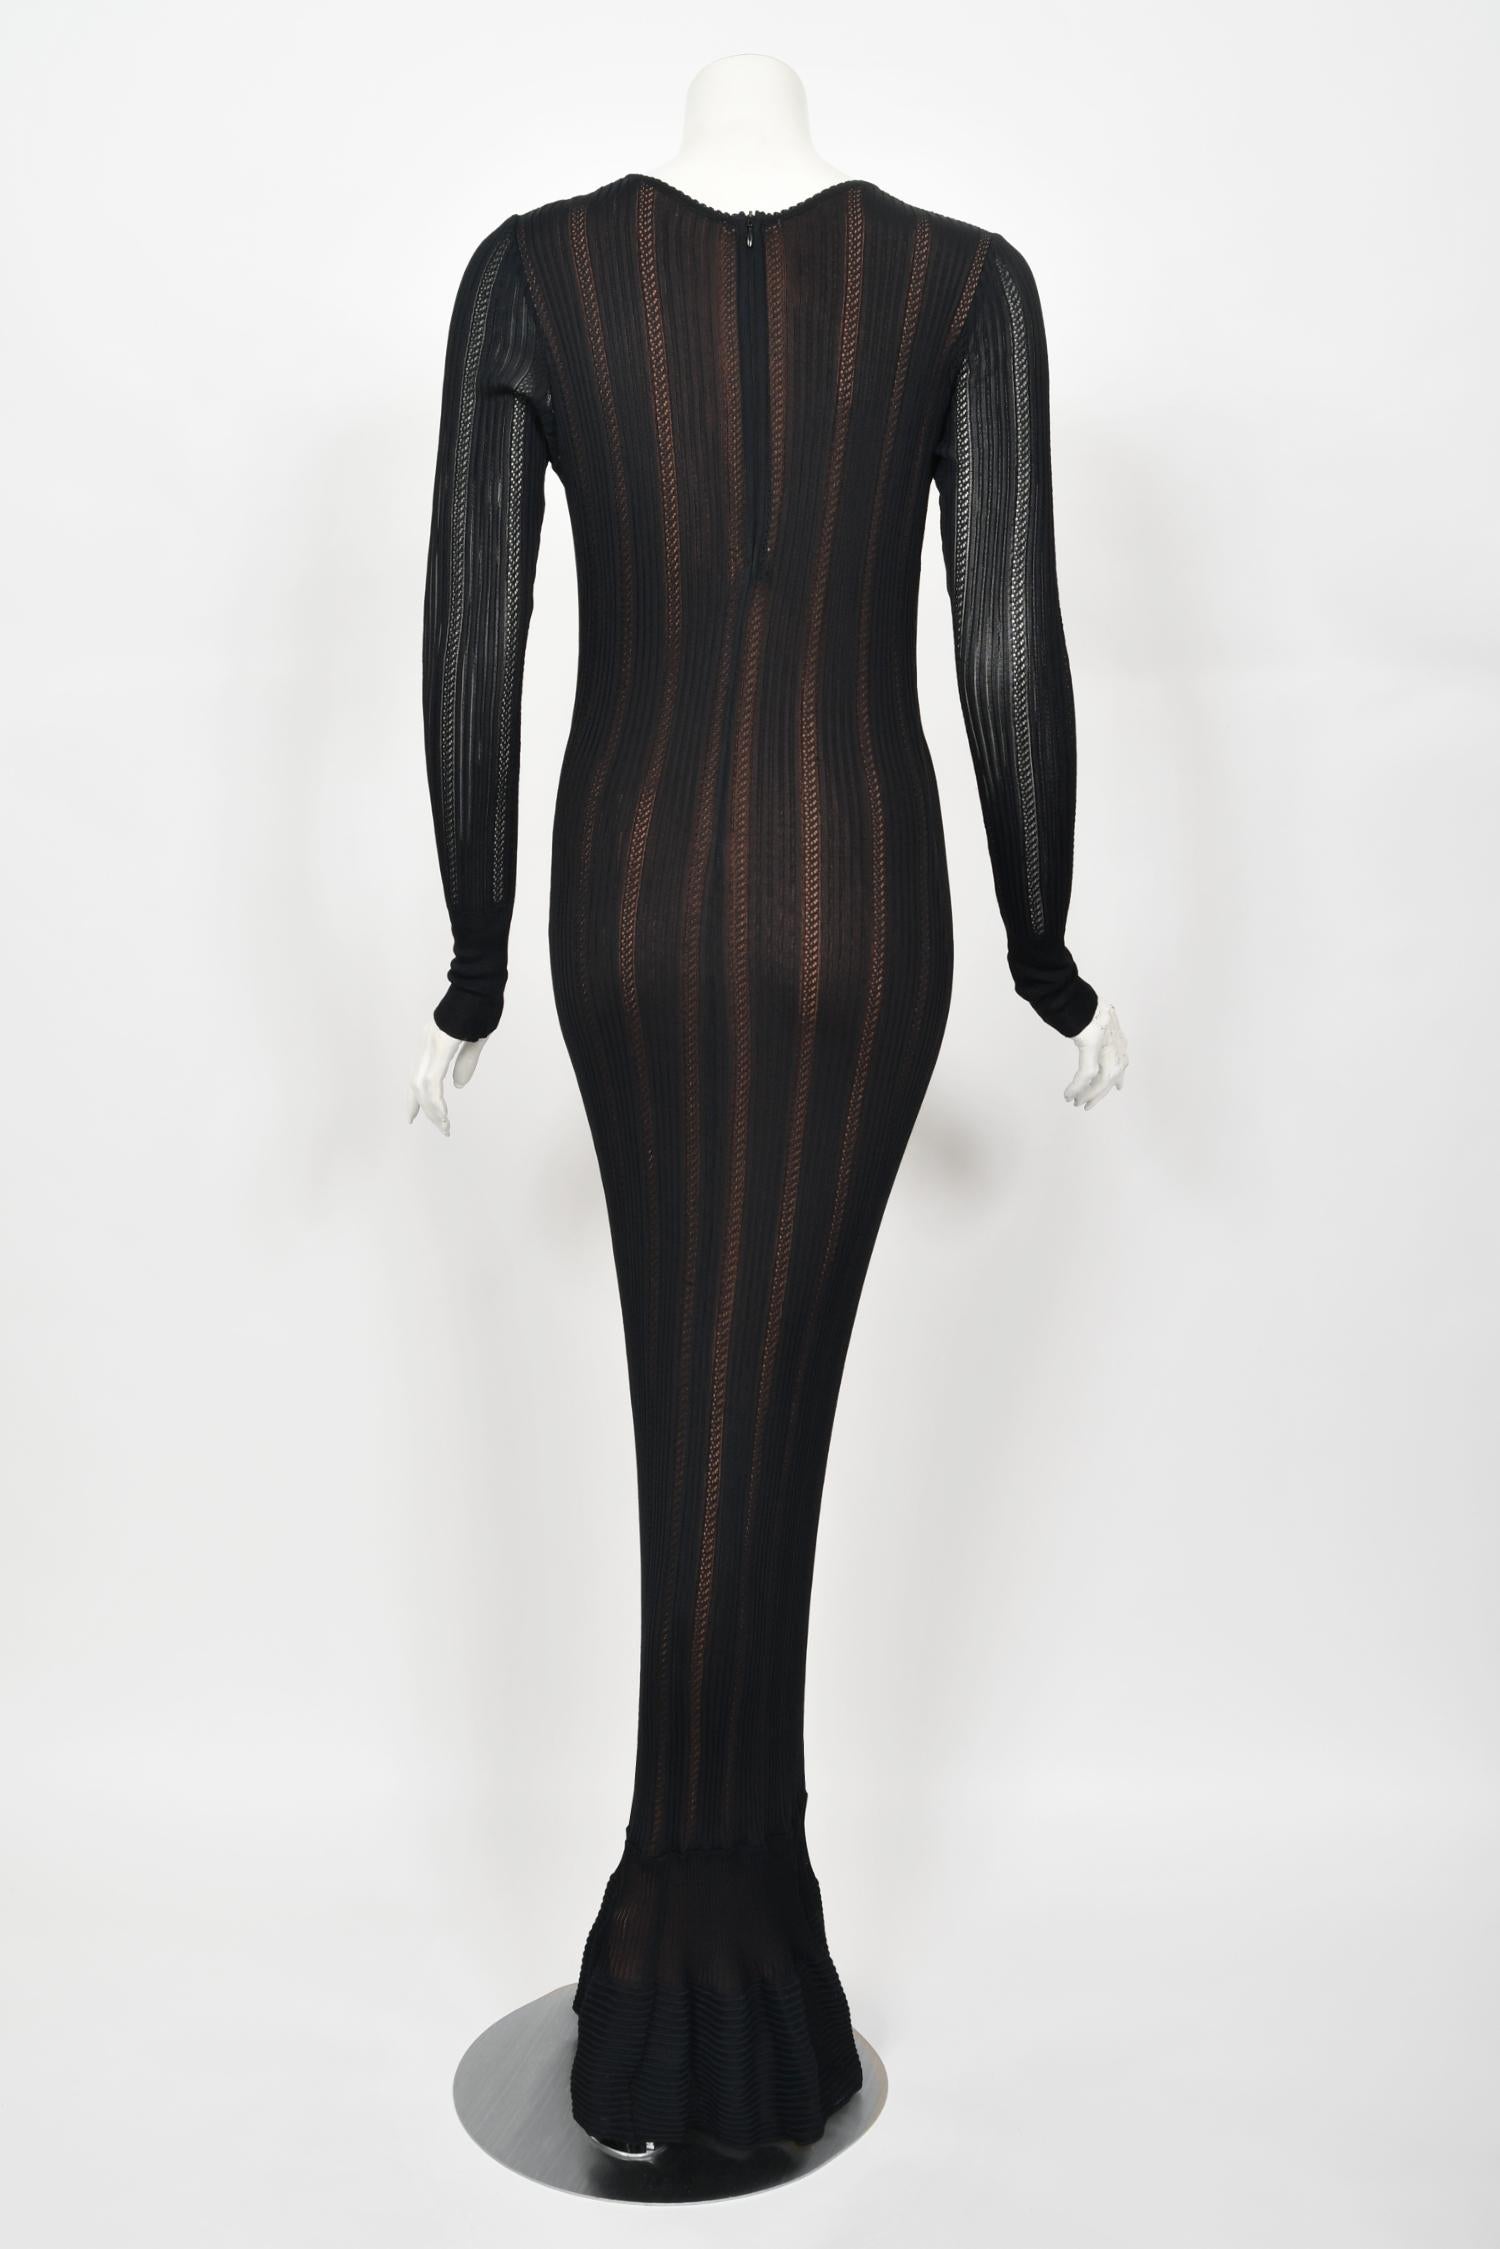 1996 Azzedine Alaia Documented Rare Nude Illusion Knit Bodycon Floor Length Gown For Sale 9